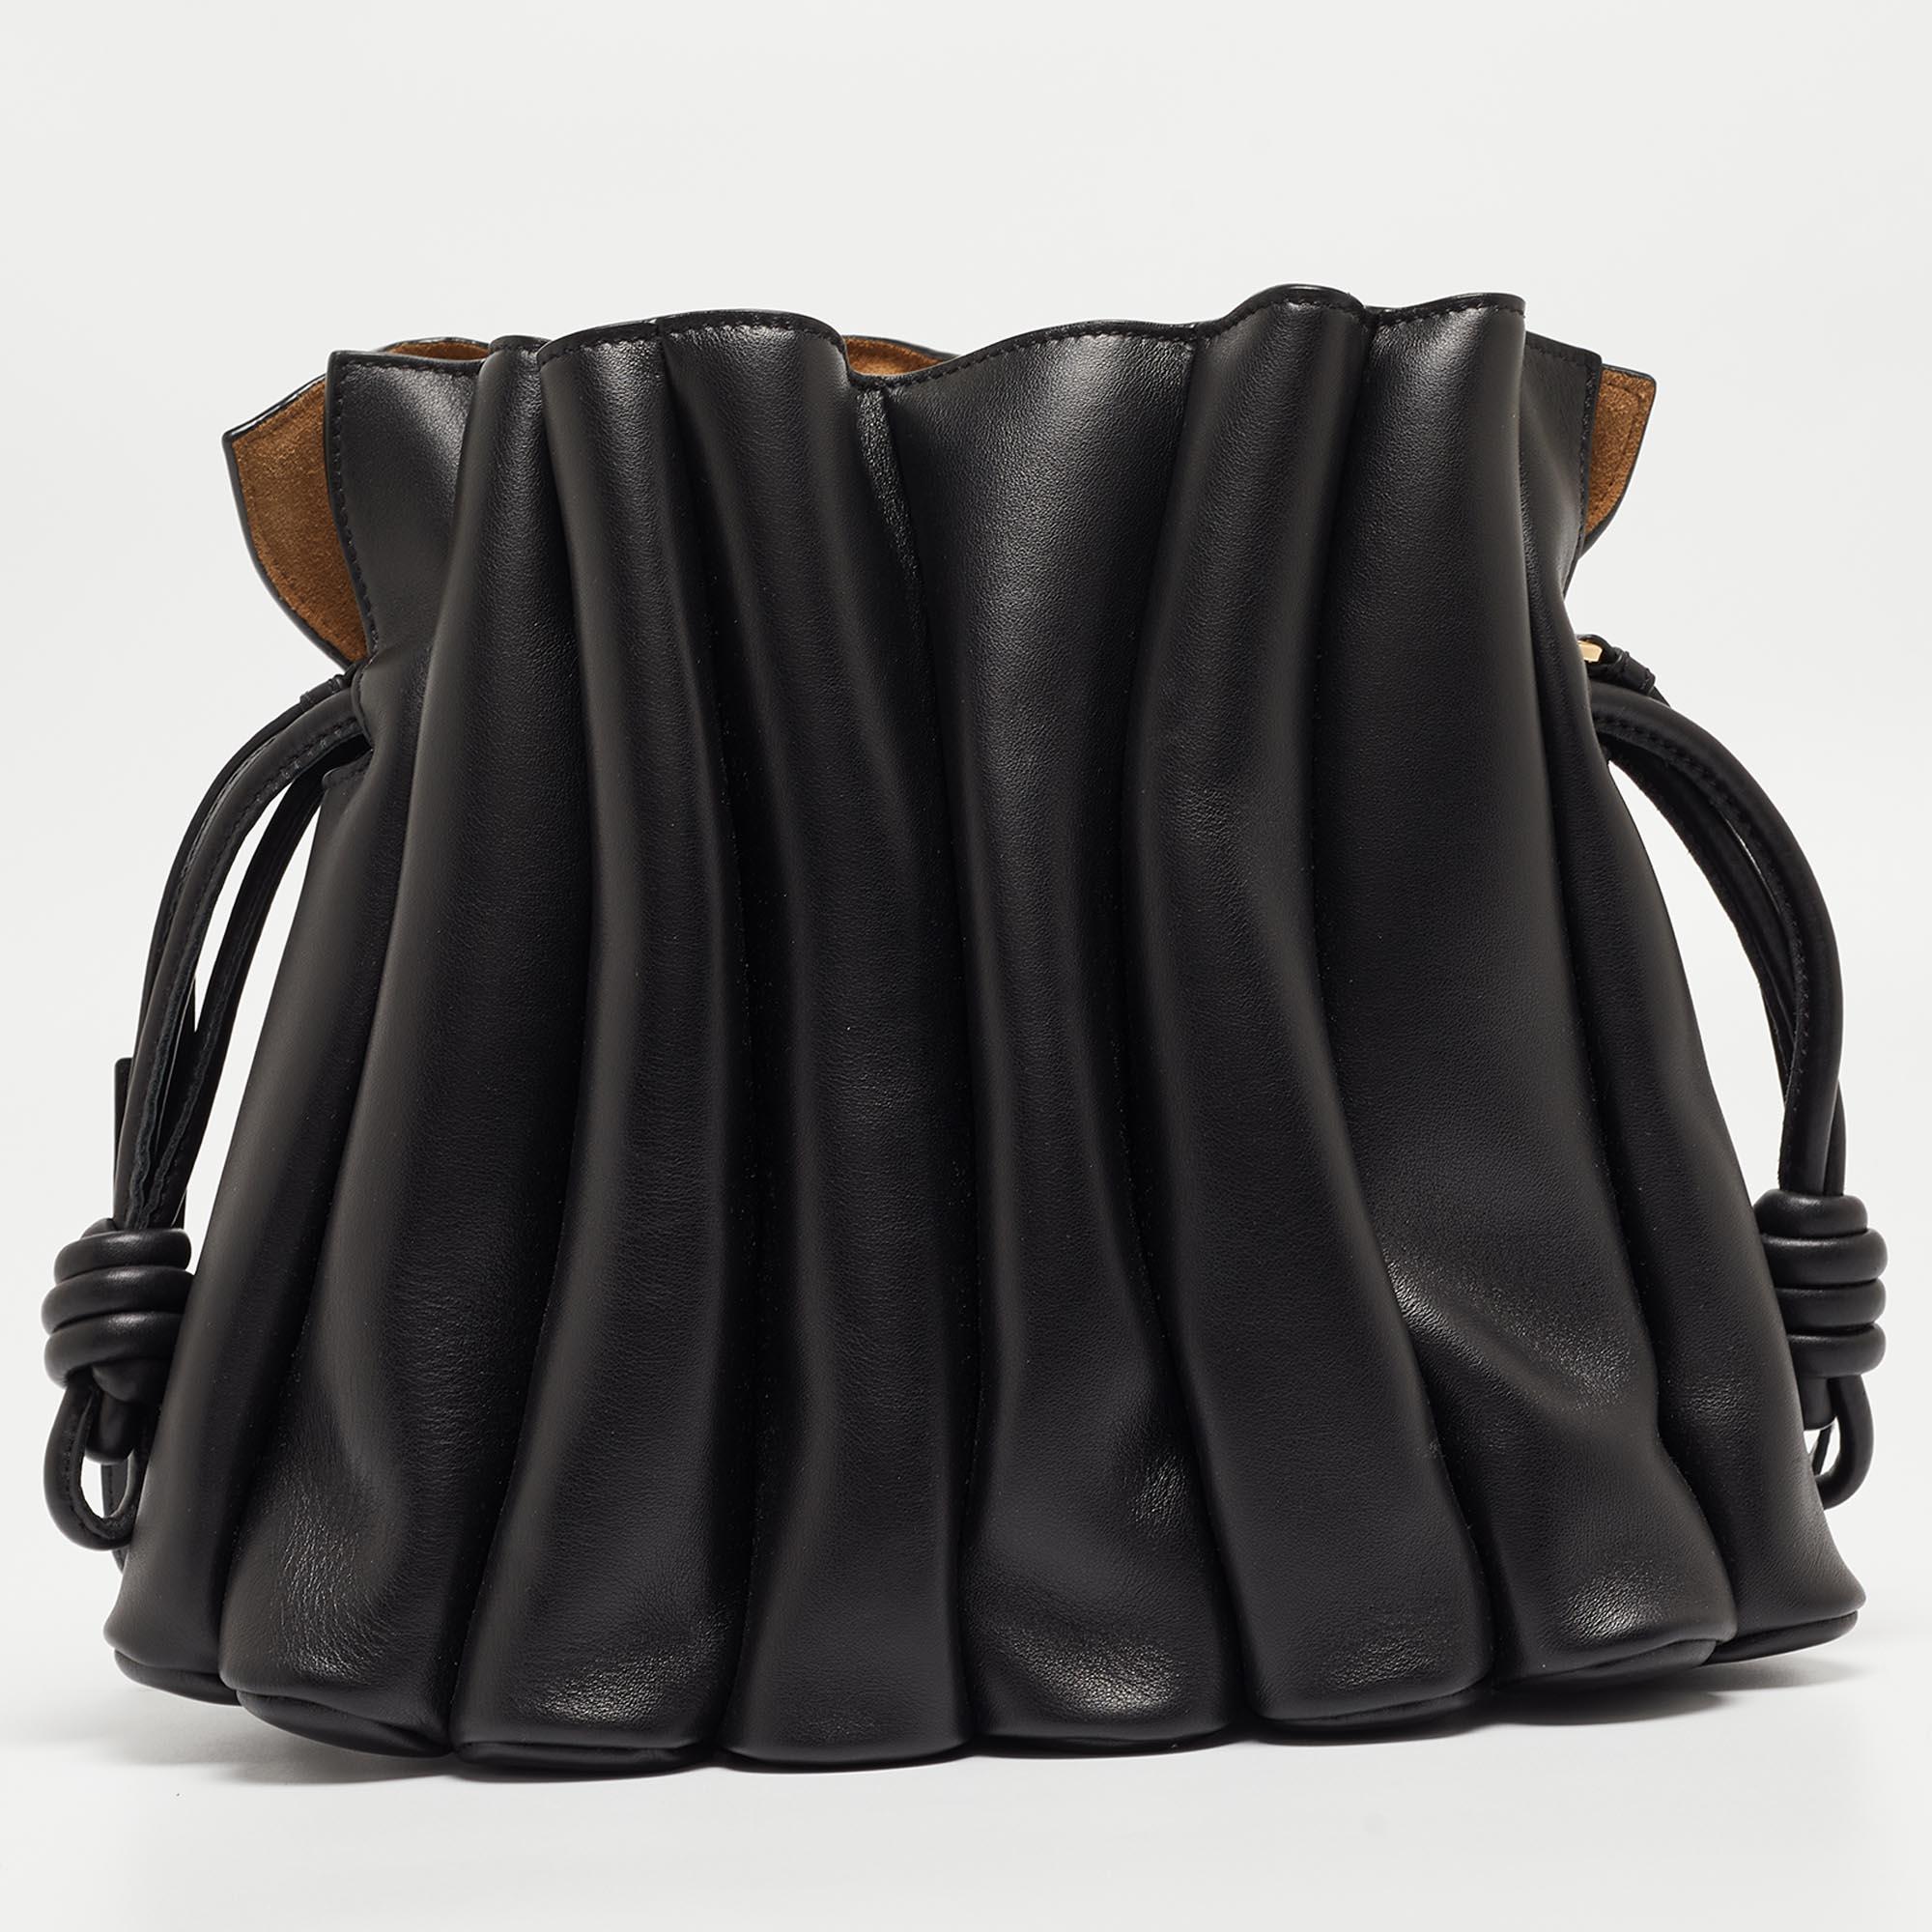 Crafted from sumptuous black leather, the Loewe Flamenco bag exudes timeless chic. Its iconic knot detailing adds a touch of flair, while the adjustable shoulder strap ensures versatility. With its spacious interior and magnetic closure, it's both